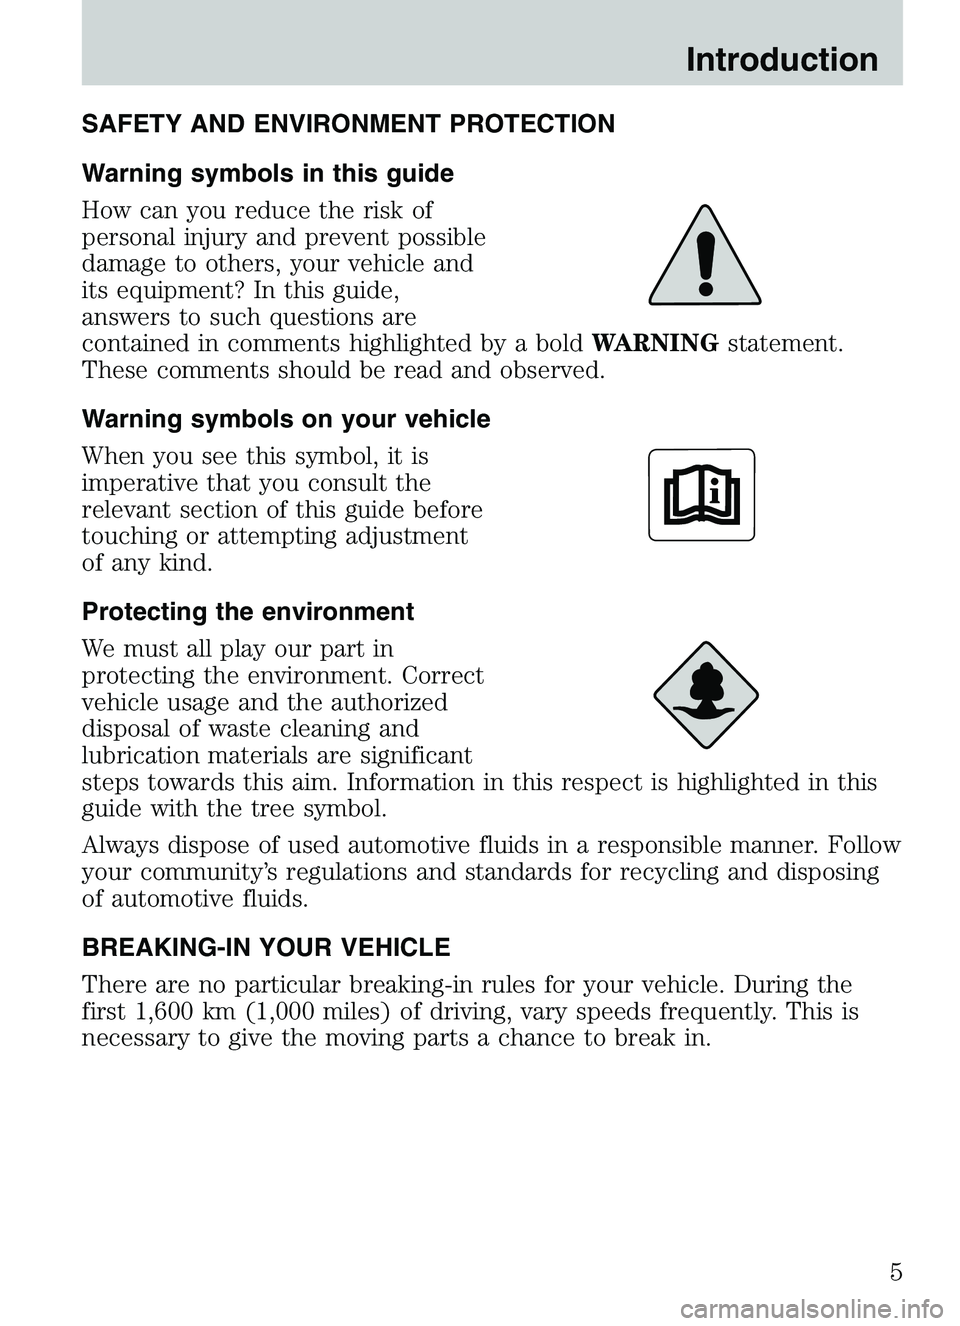 MAZDA MODEL B4000 4WD 2003  Owners Manual SAFETY AND ENVIRONMENT PROTECTION
Warning symbols in this guide
How can you reduce the risk of
personal injury and prevent possible
damage to others, your vehicle and
its equipment? In this guide,
ans